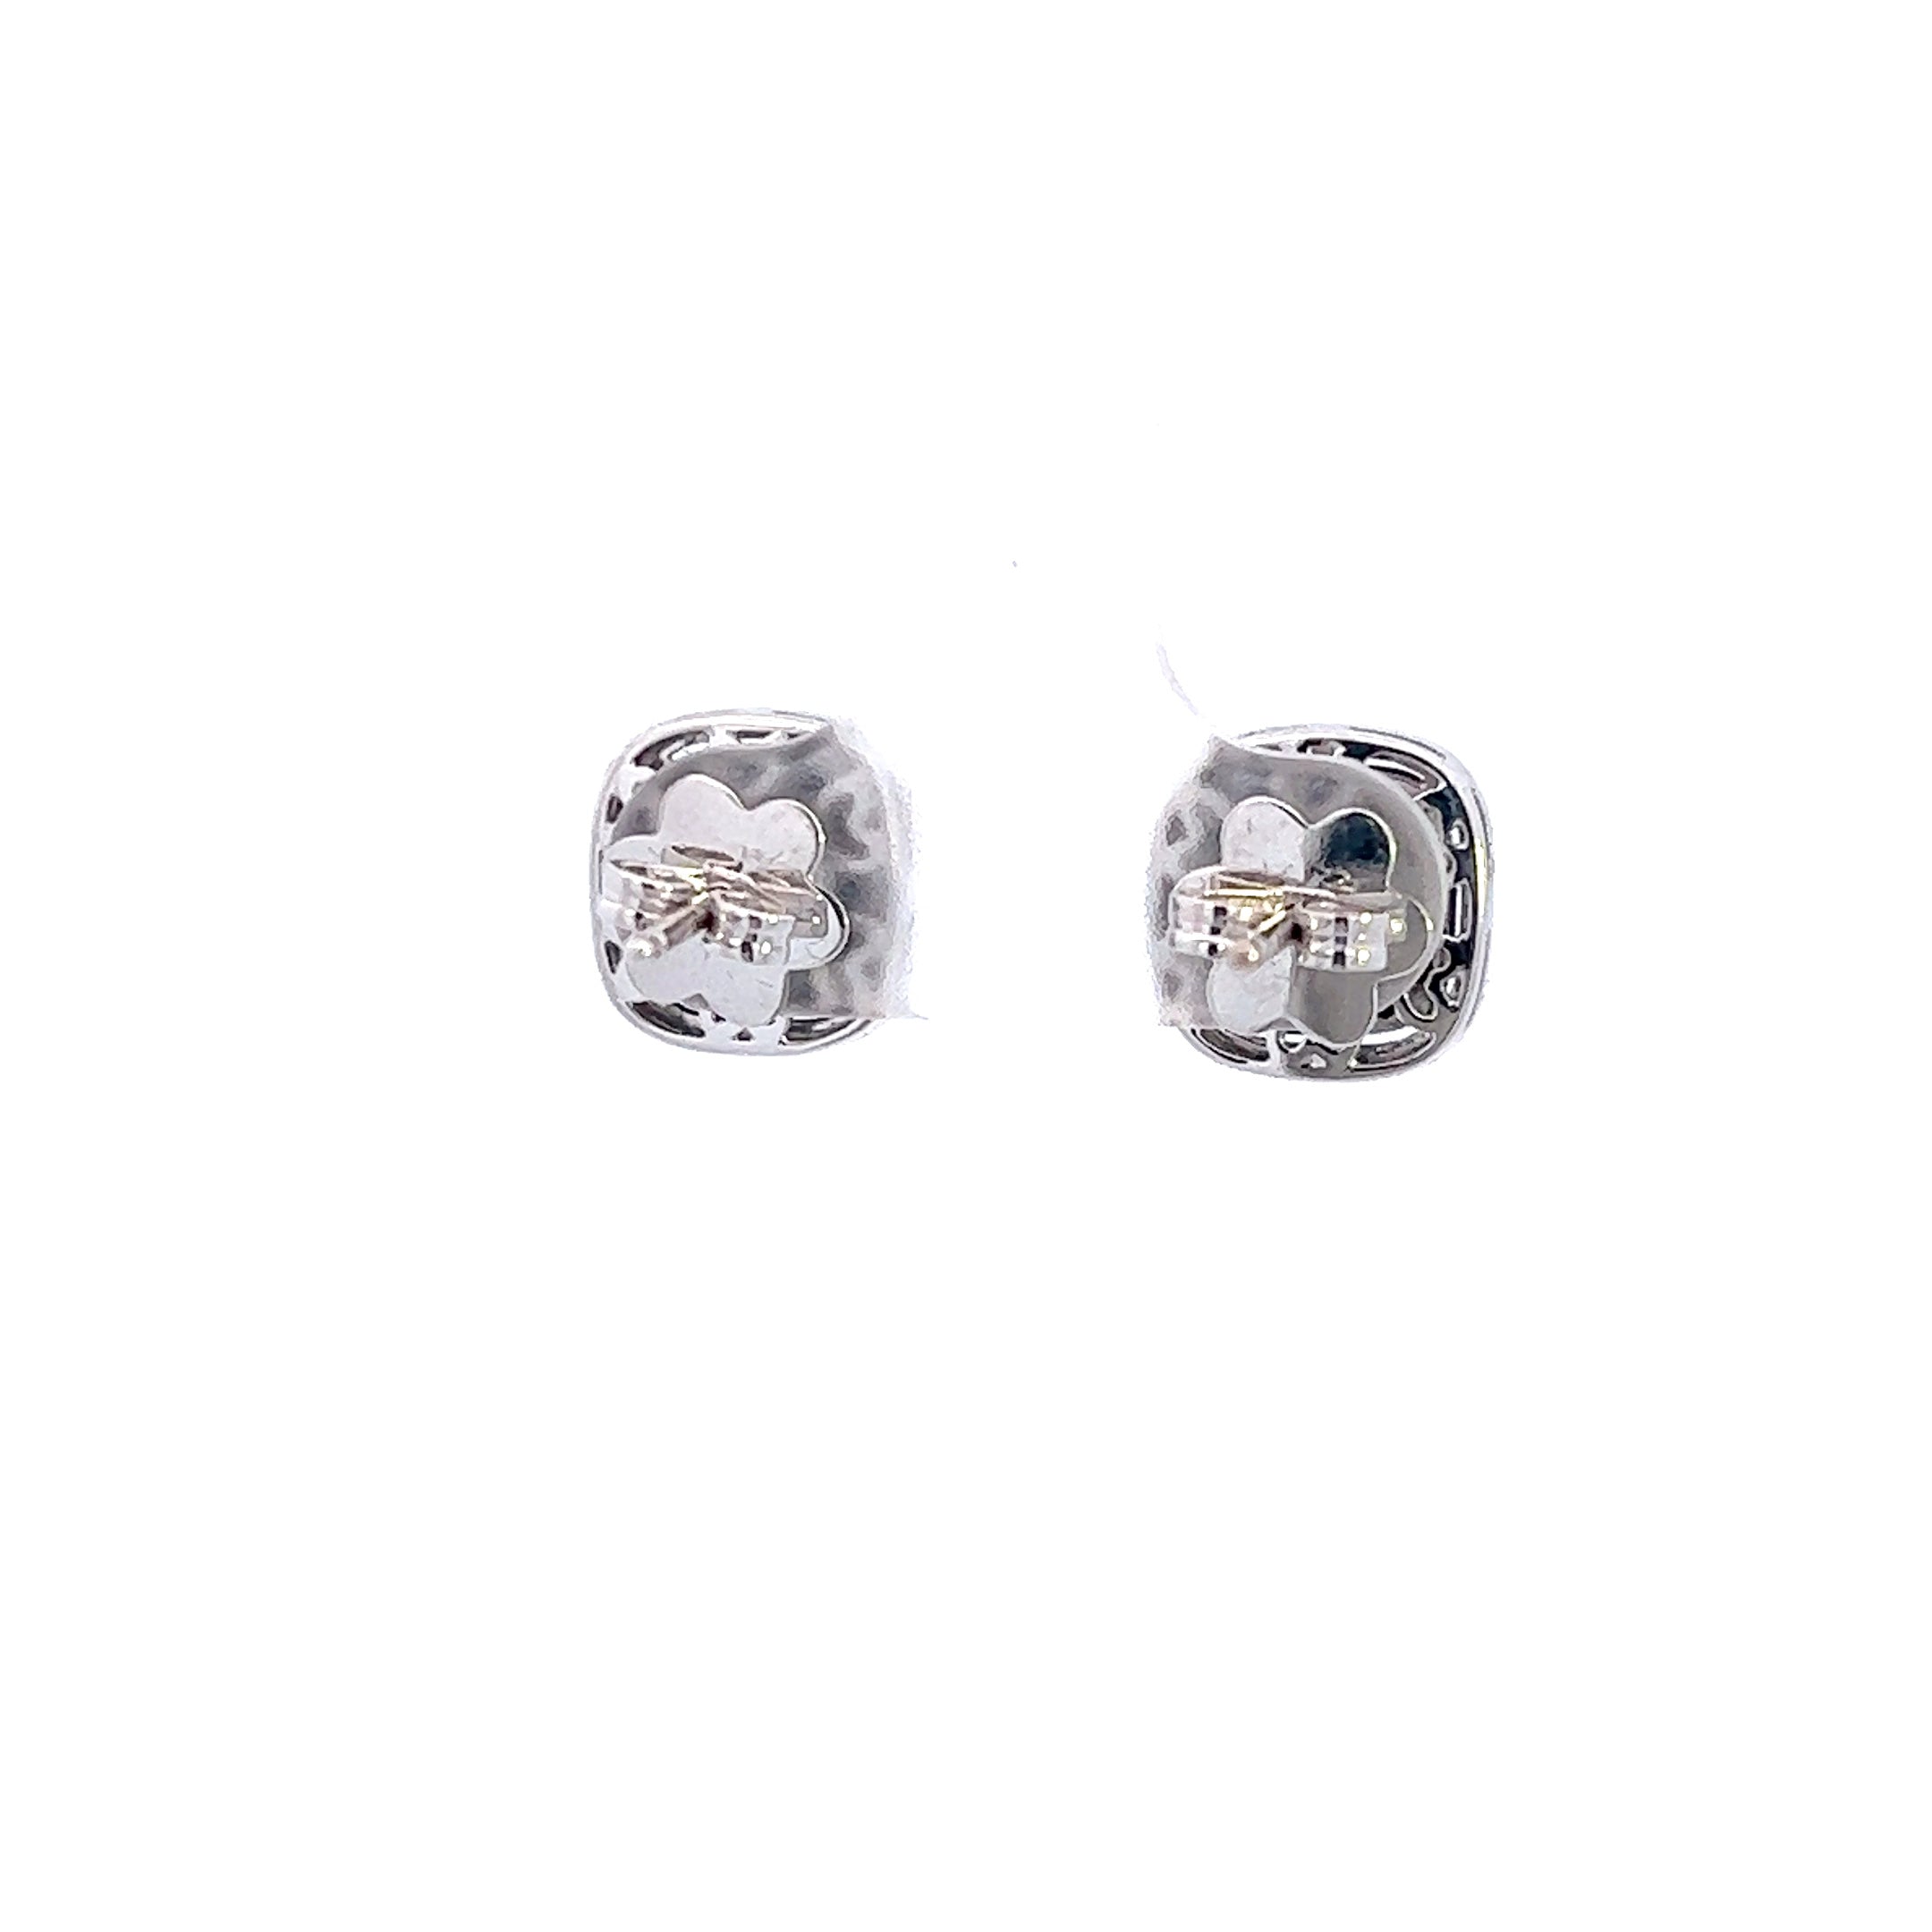 14k White Gold Earrings with natural Diamond Square Shaped with curvy edges with Black stones